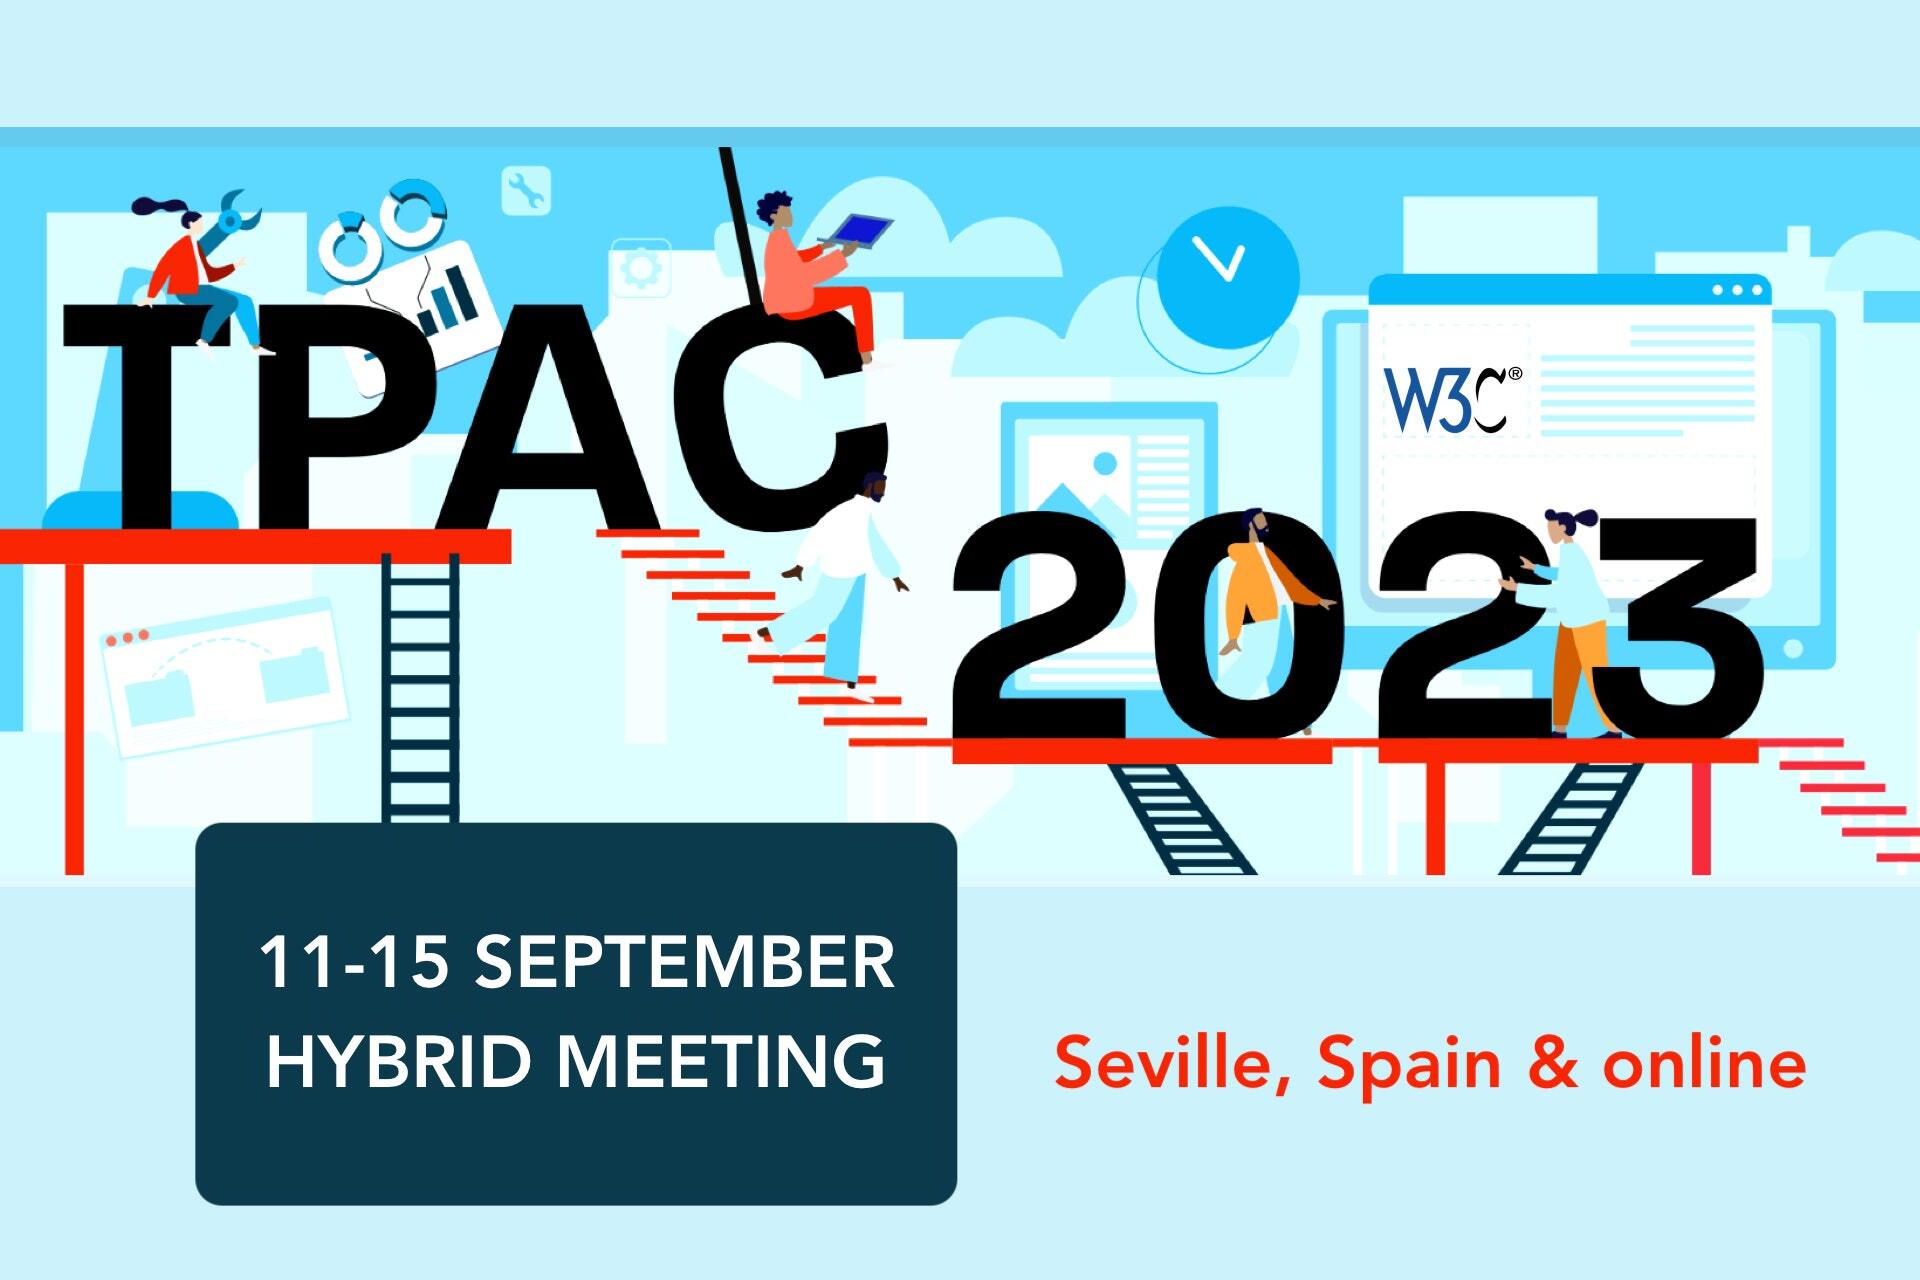 TPAC 2023 illustration with text: 11-15 September in Seville Spain and online